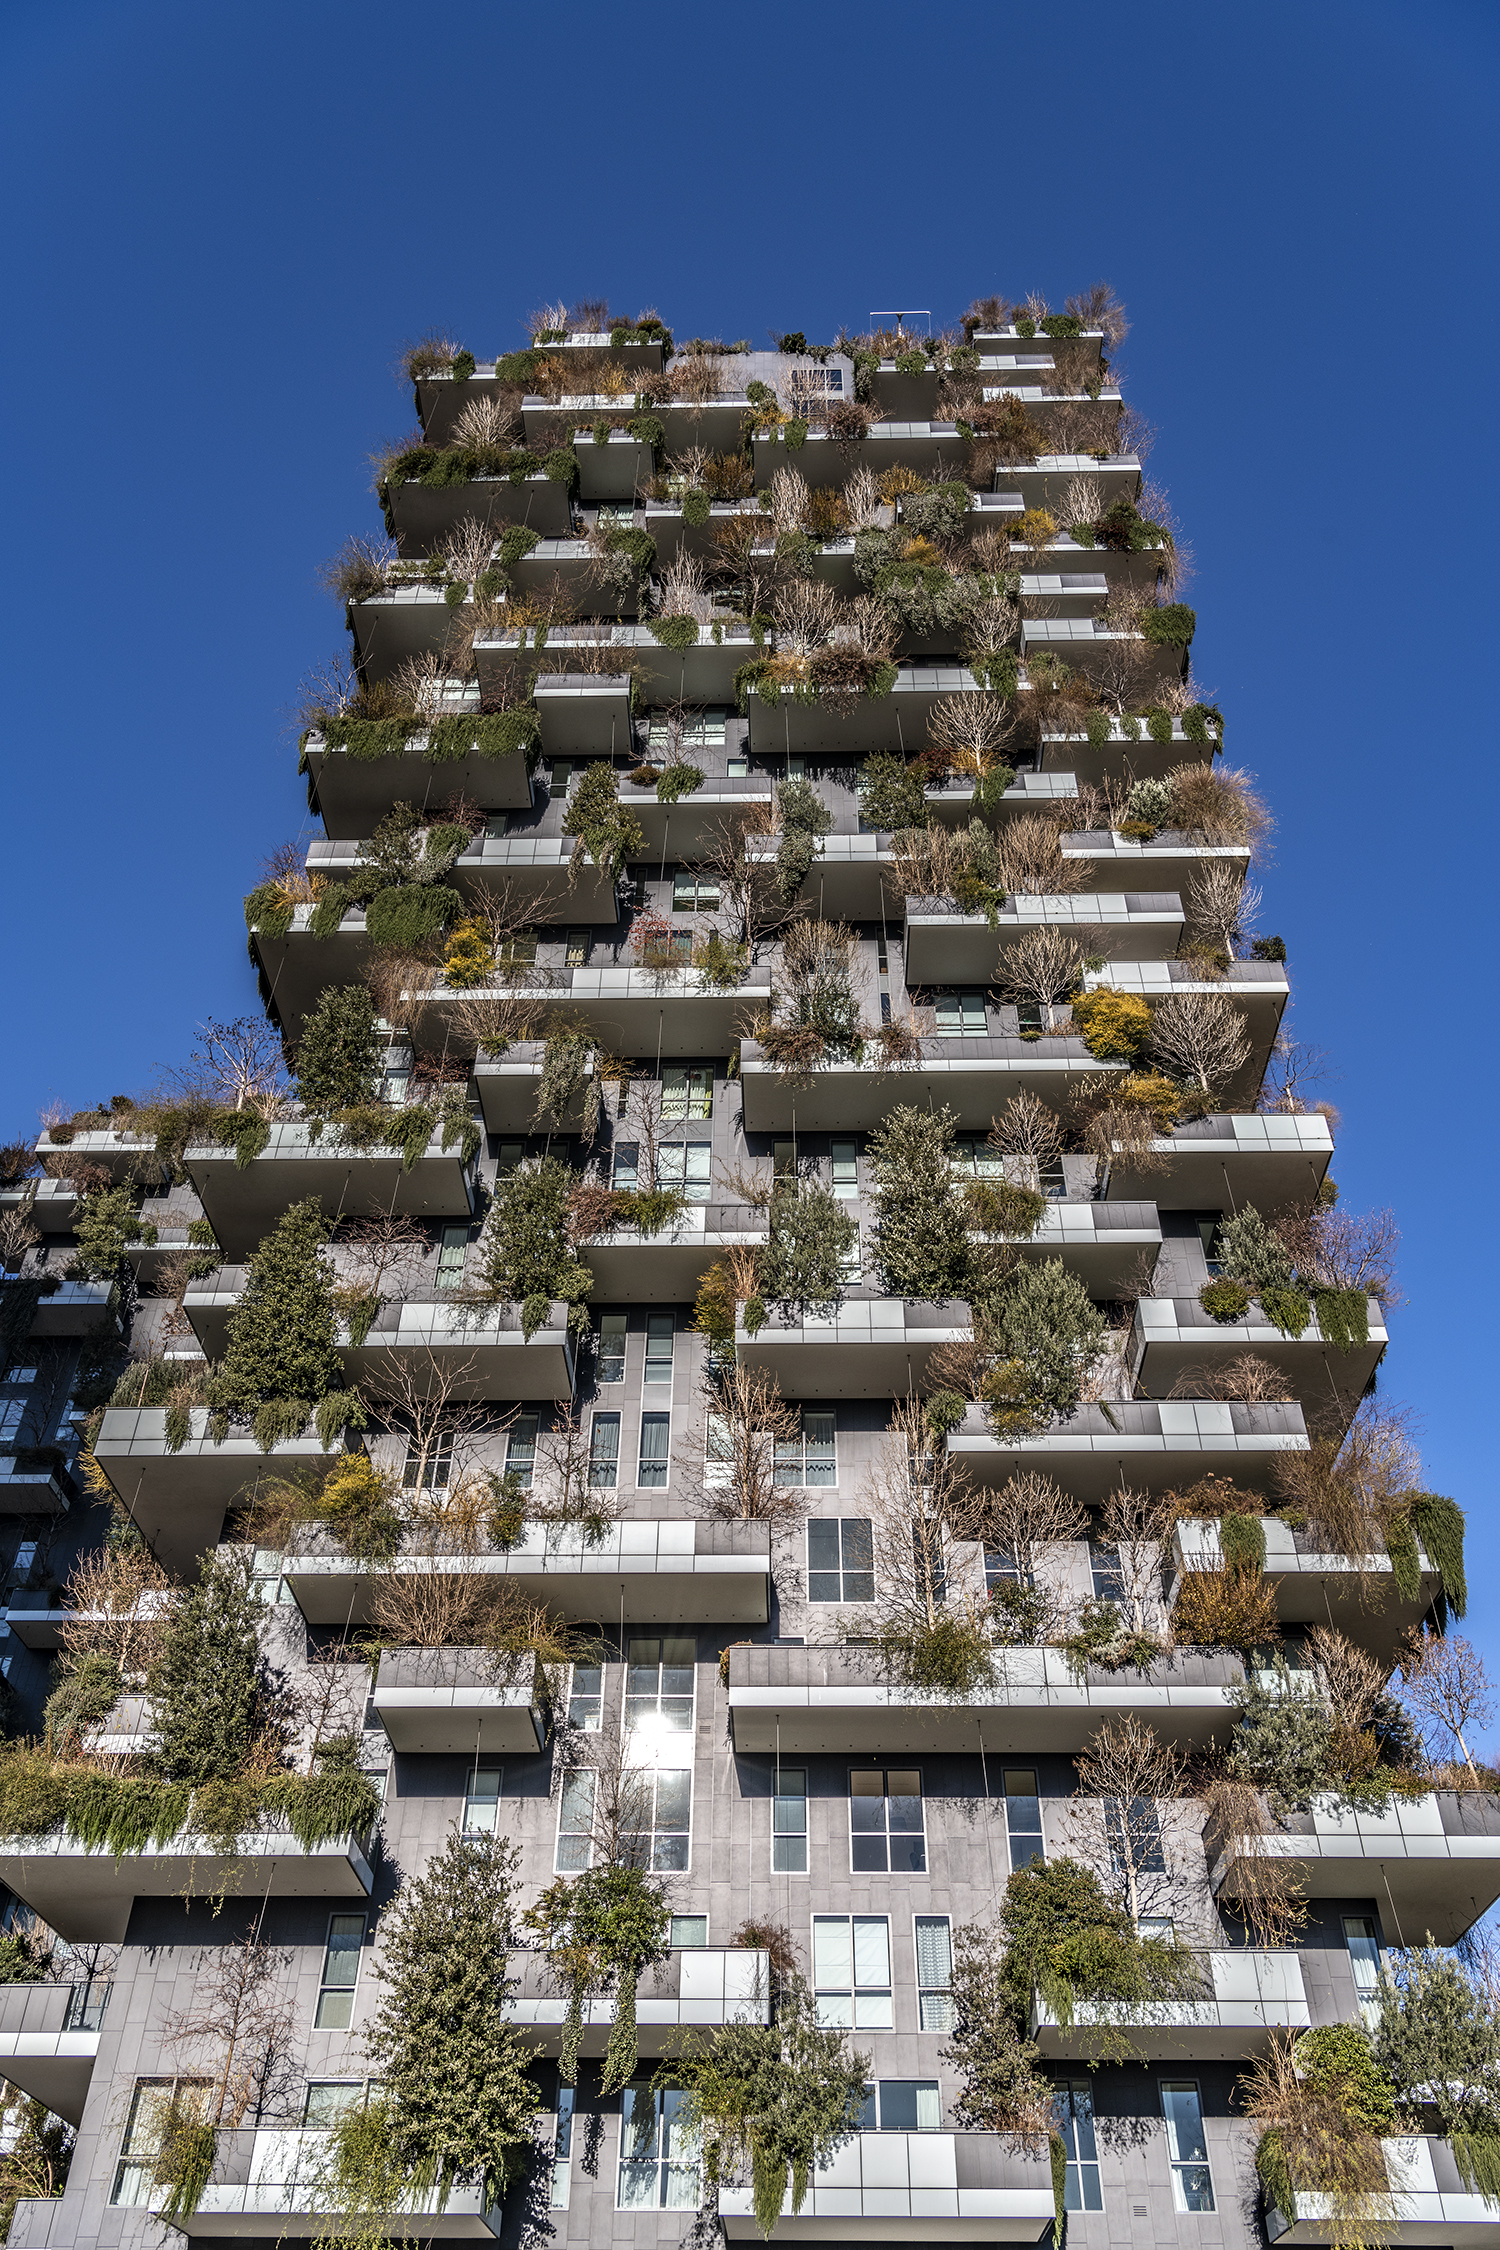 Residential tower block with trees - vertical forest (Milan, Italy)